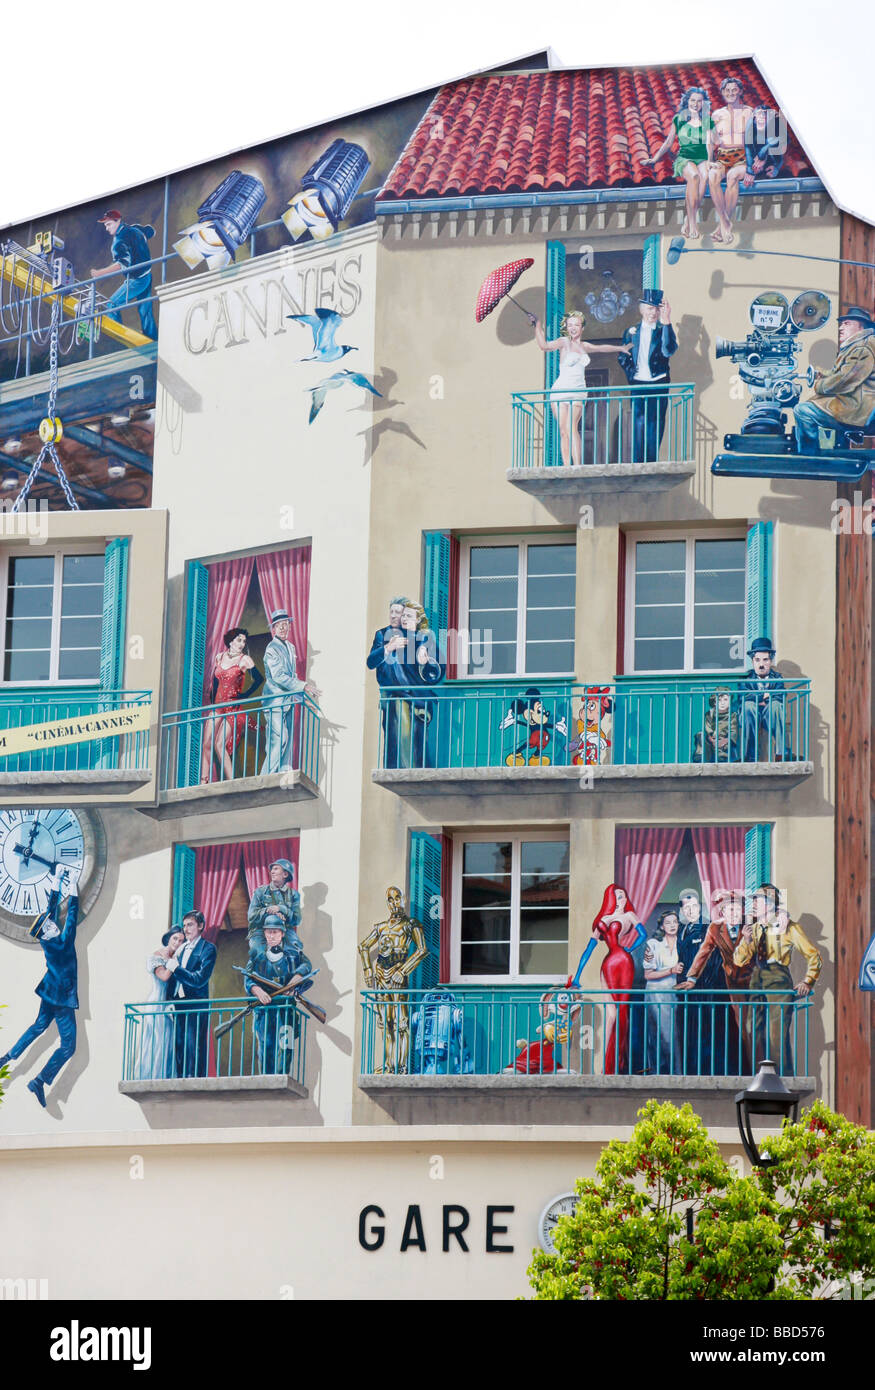 Bright,Amusing,lively murals on a building in Cannes,France,relate to the famous Cannes Film Festival held annually in the city Stock Photo